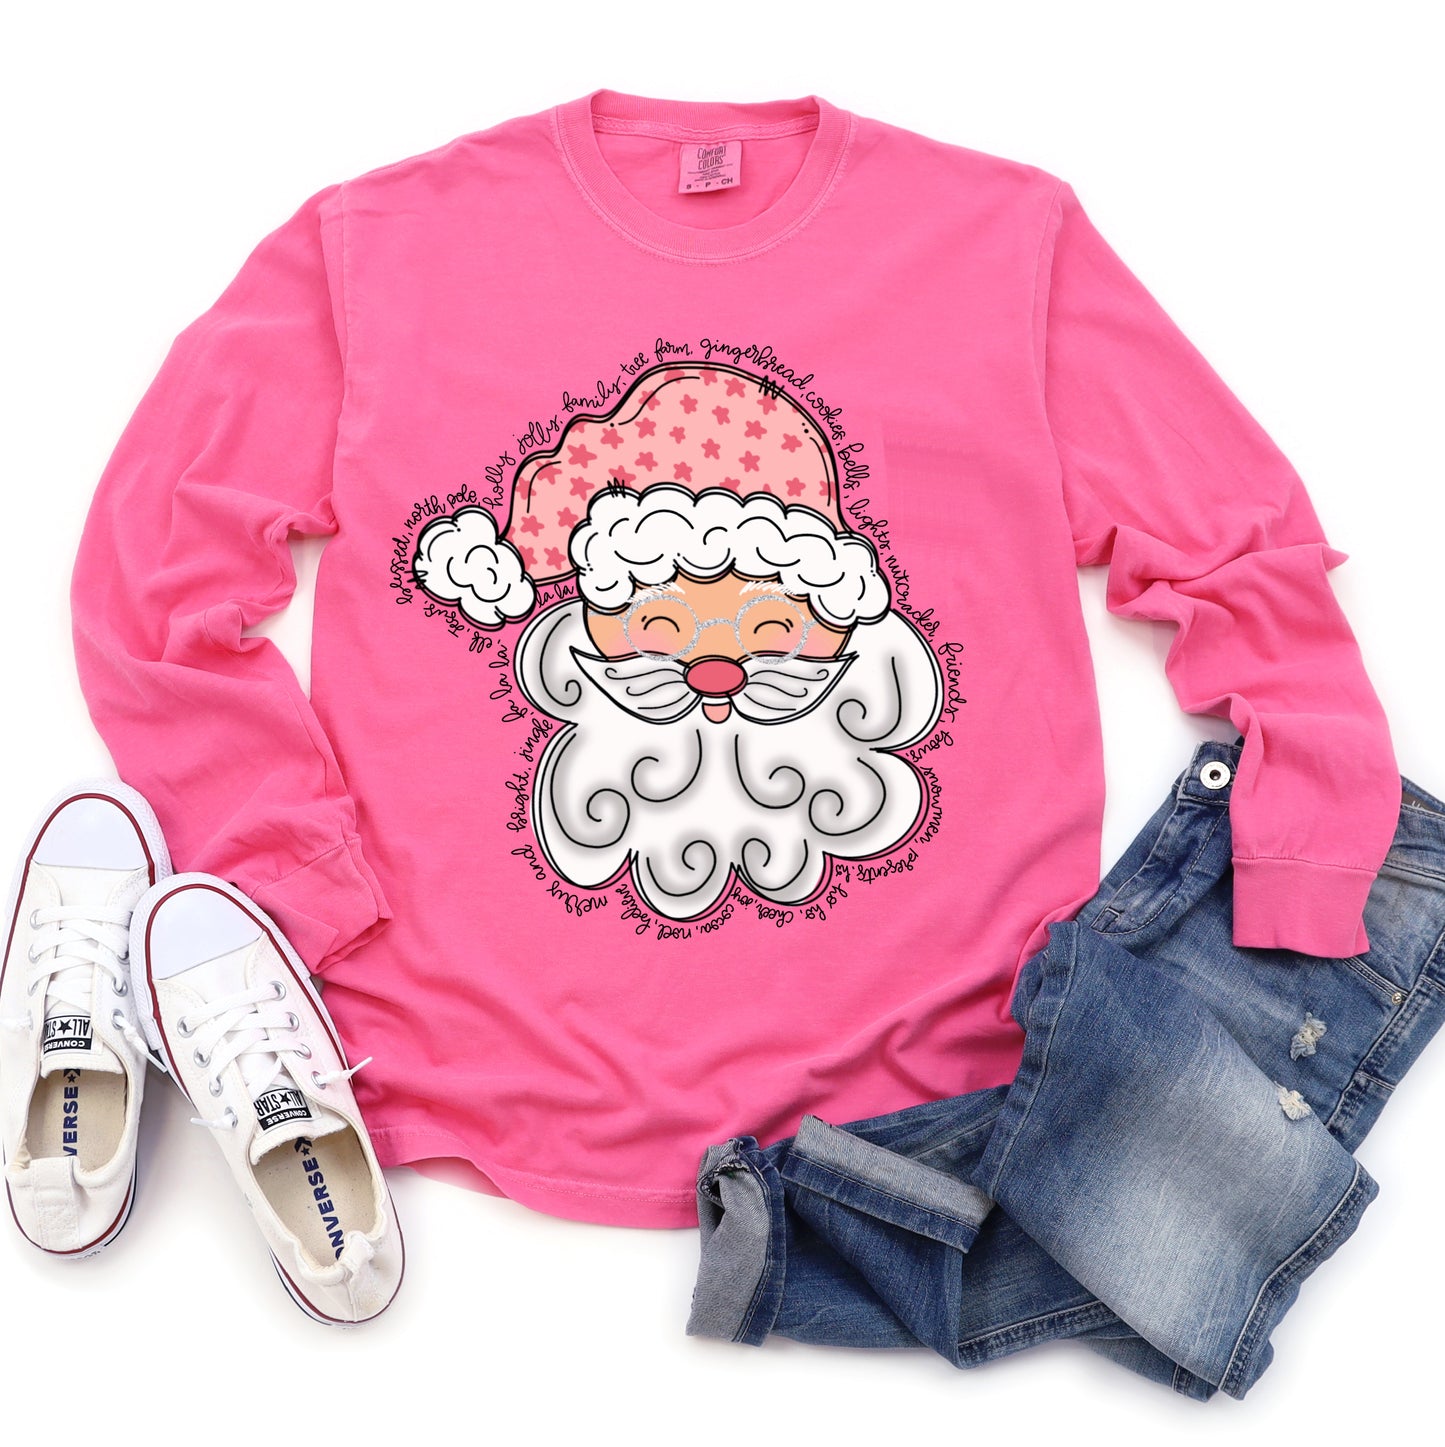 Comfort Colors Long Sleeved Pink Santa Tee -  Youth and Adult Sizes - Christmas Shirt